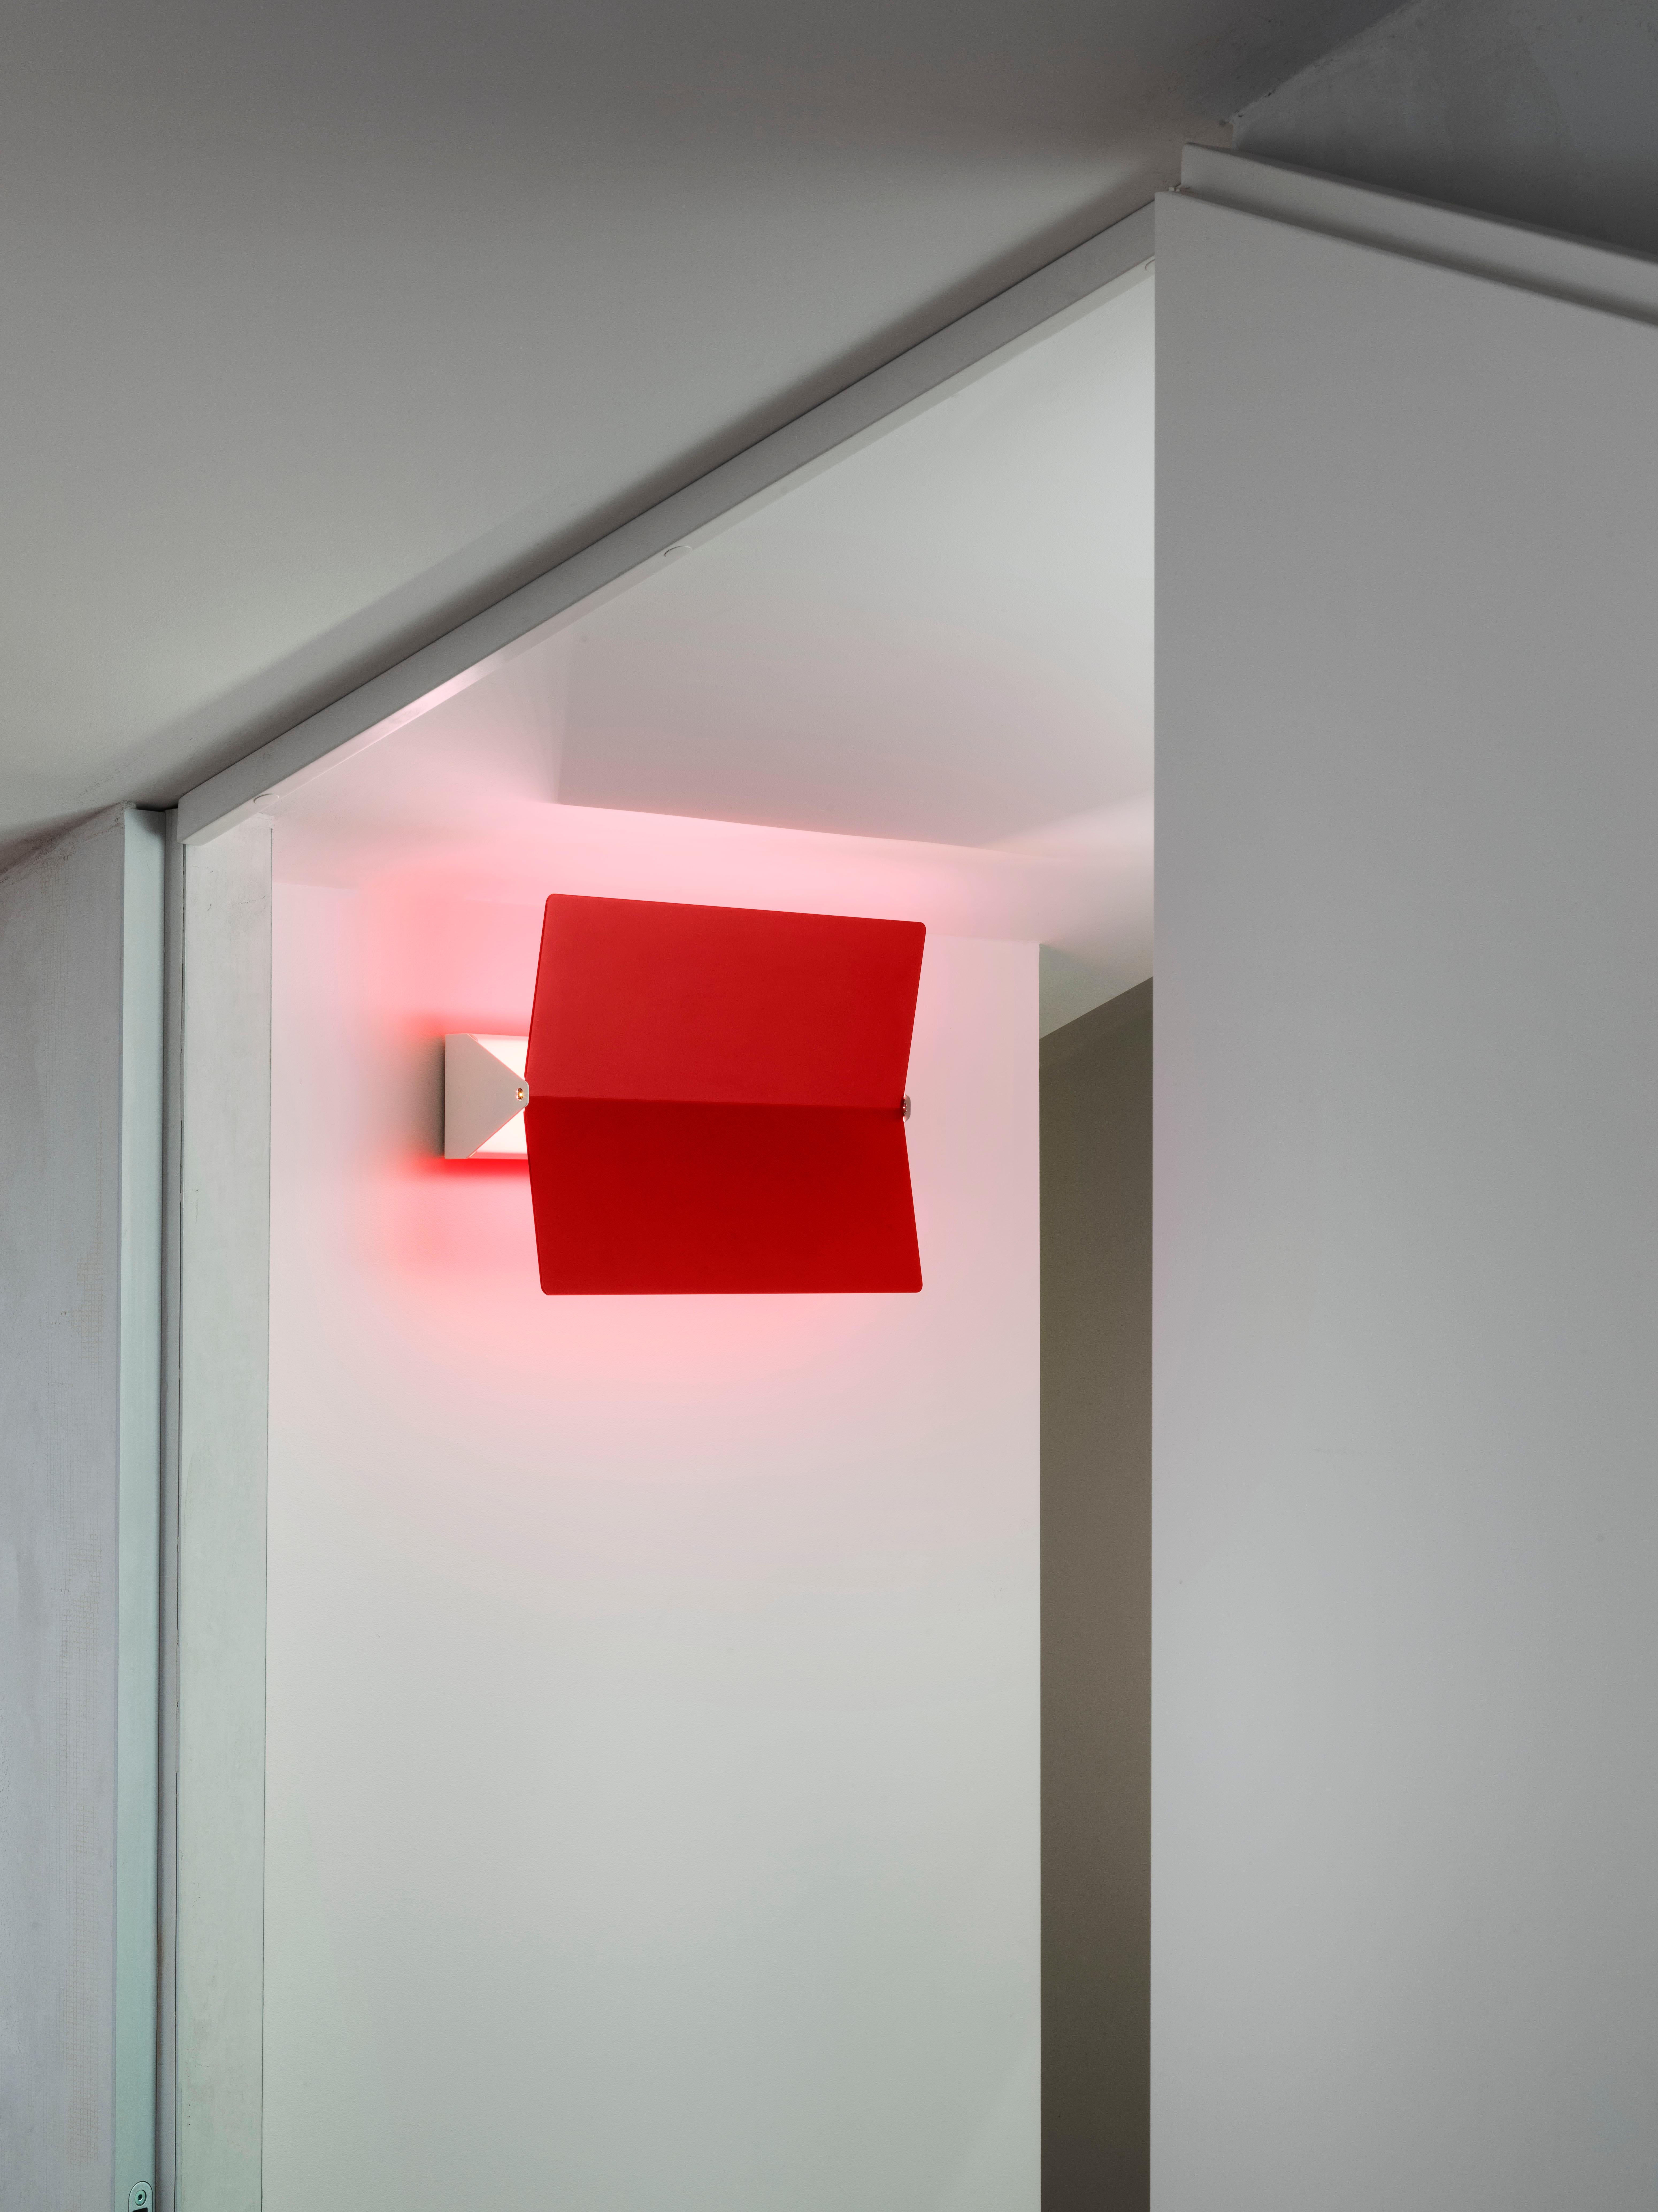 Large Charlotte Perriand 'Applique À Volet Pivotant Plié' wall light in red. 

Originally designed in the 1950s as the iconic CP1, these newly produced authorized re-editions are still made in France with the highest level of integrity and attention